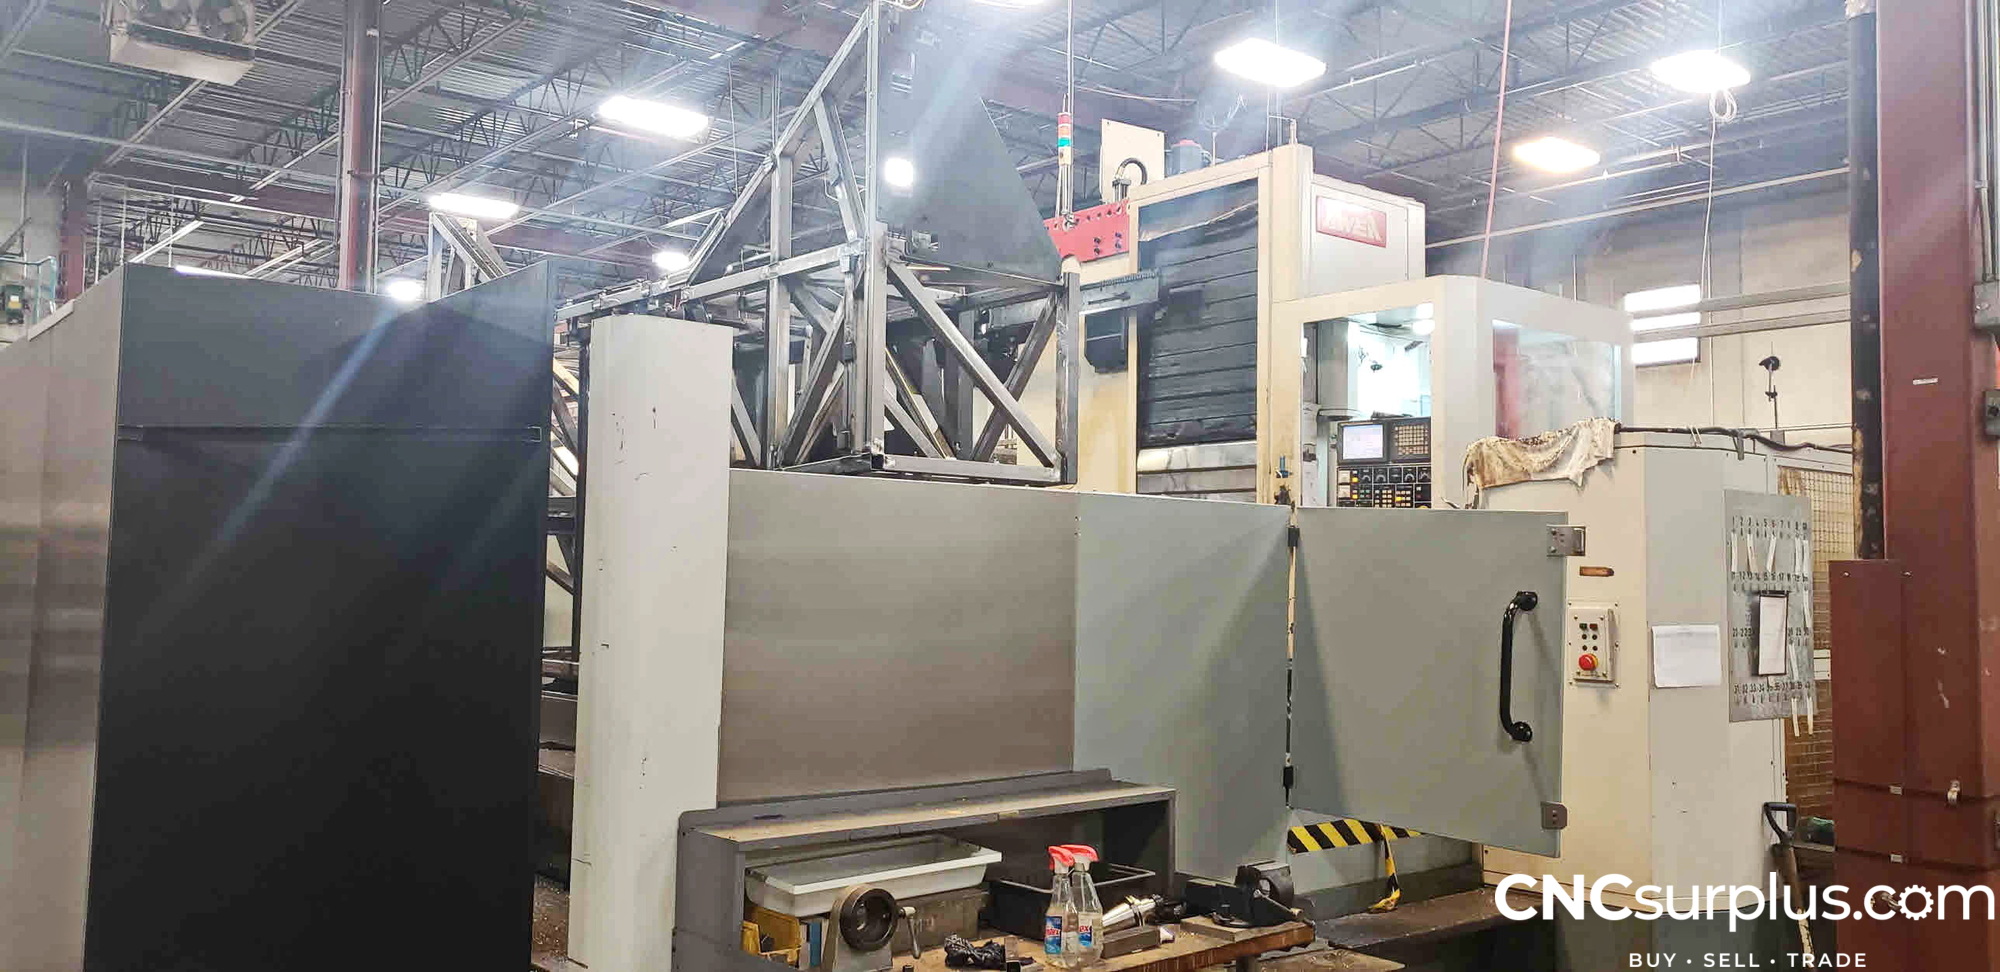 2009 AWEA BL3018FM Horizontal Table Type Boring Mills | CNCsurplus, A Div. of Comtex Leasing Corp.